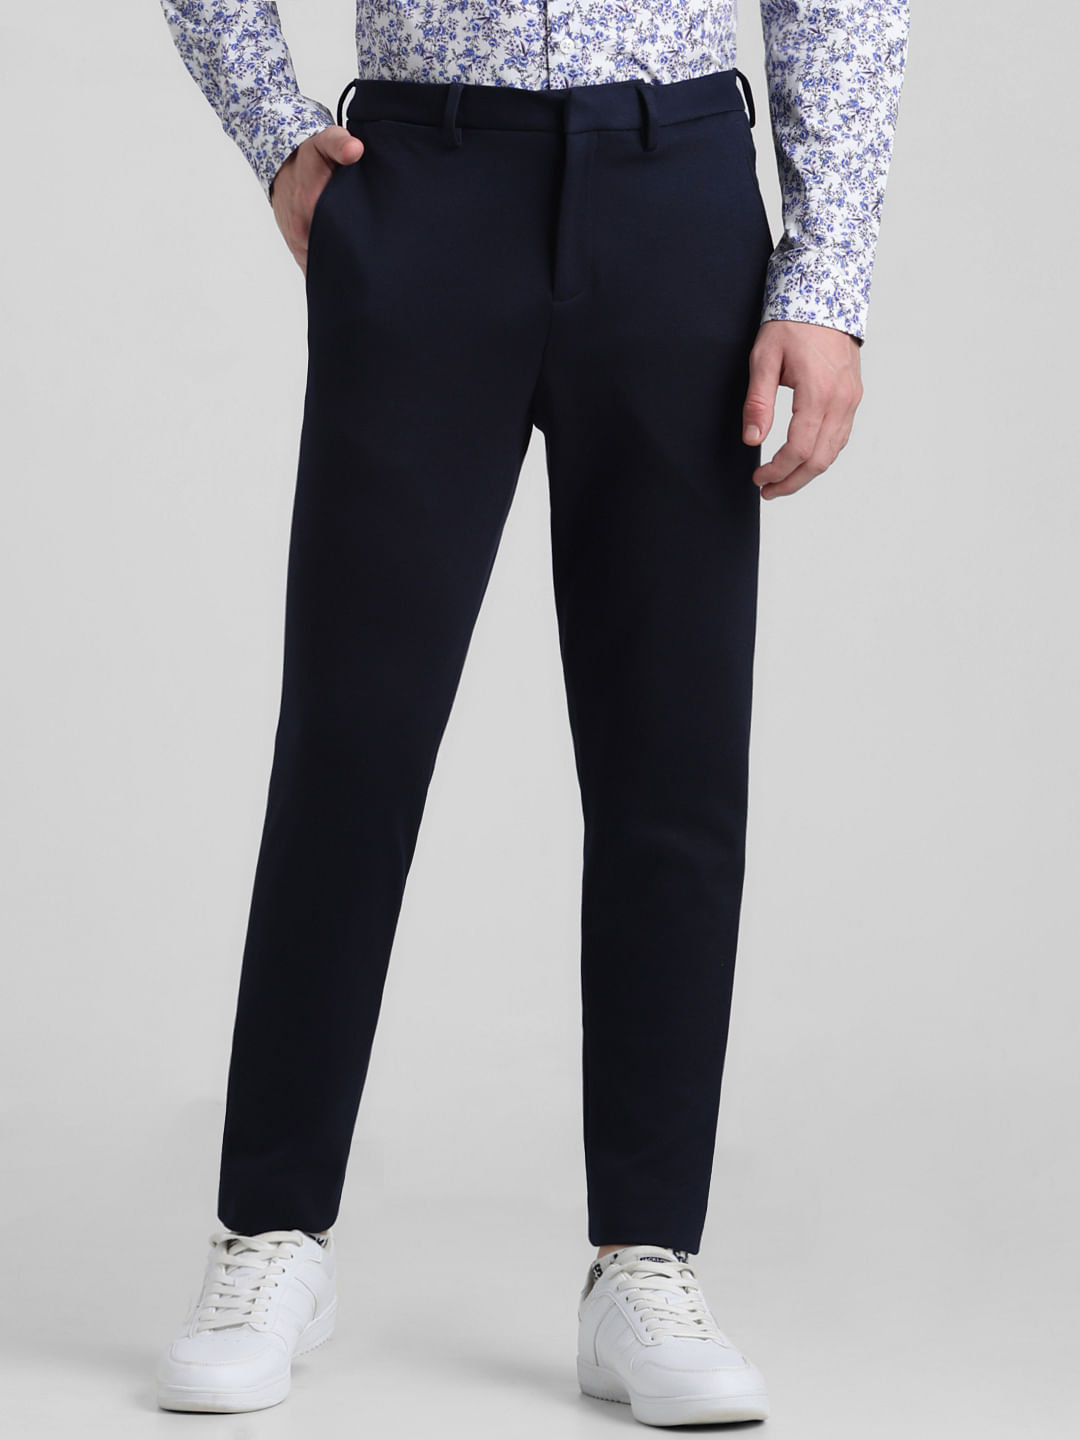 Navy Stretch Corduroy Dress Pant - Custom Fit Tailored Clothing